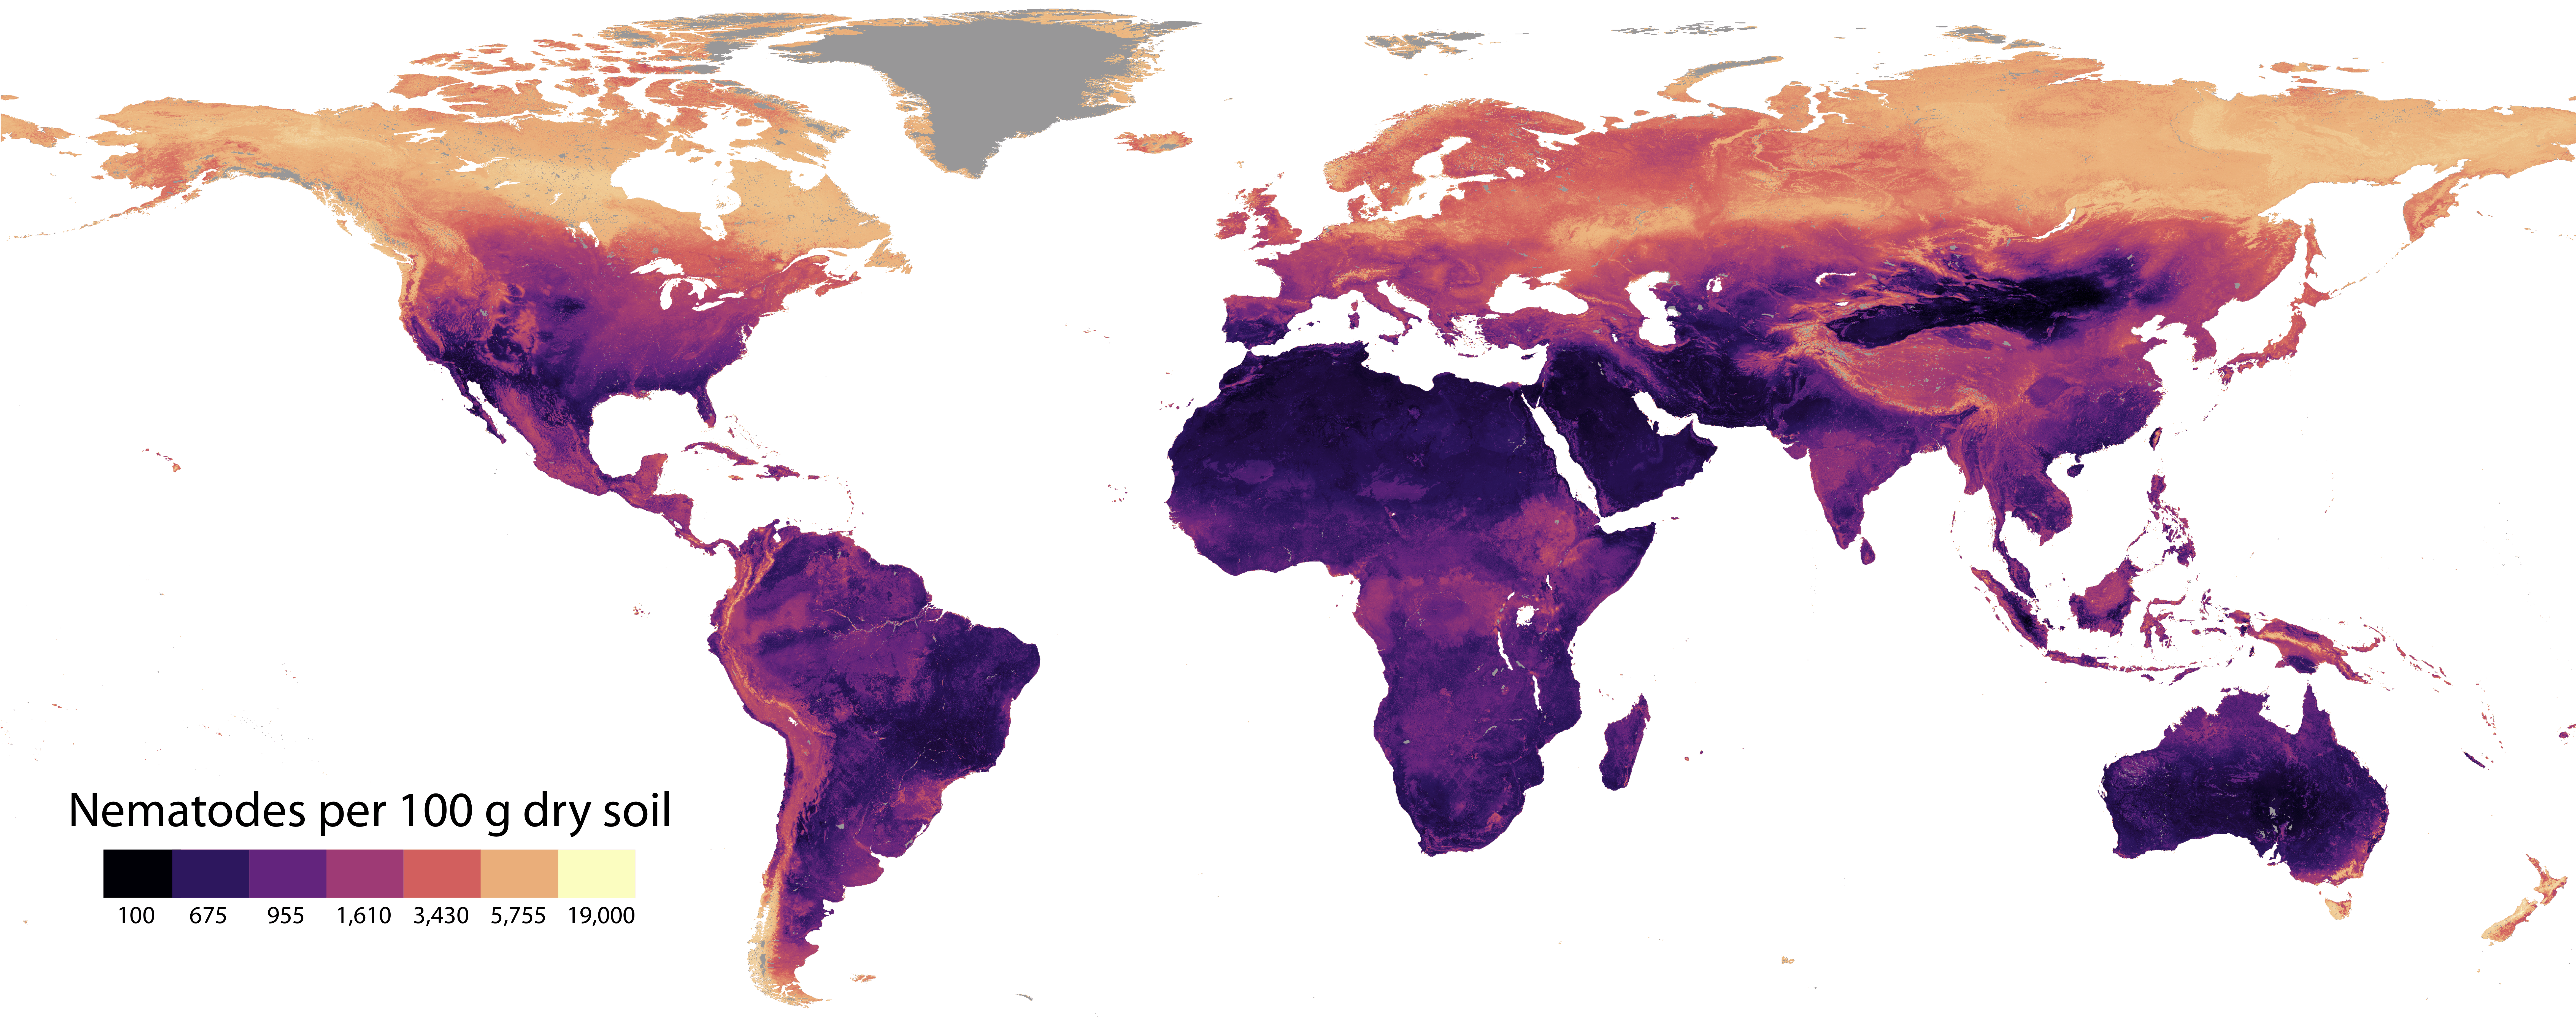 Global map of soil nematode density at the 30 arcsec (approximately 1 km2) pixel scale.